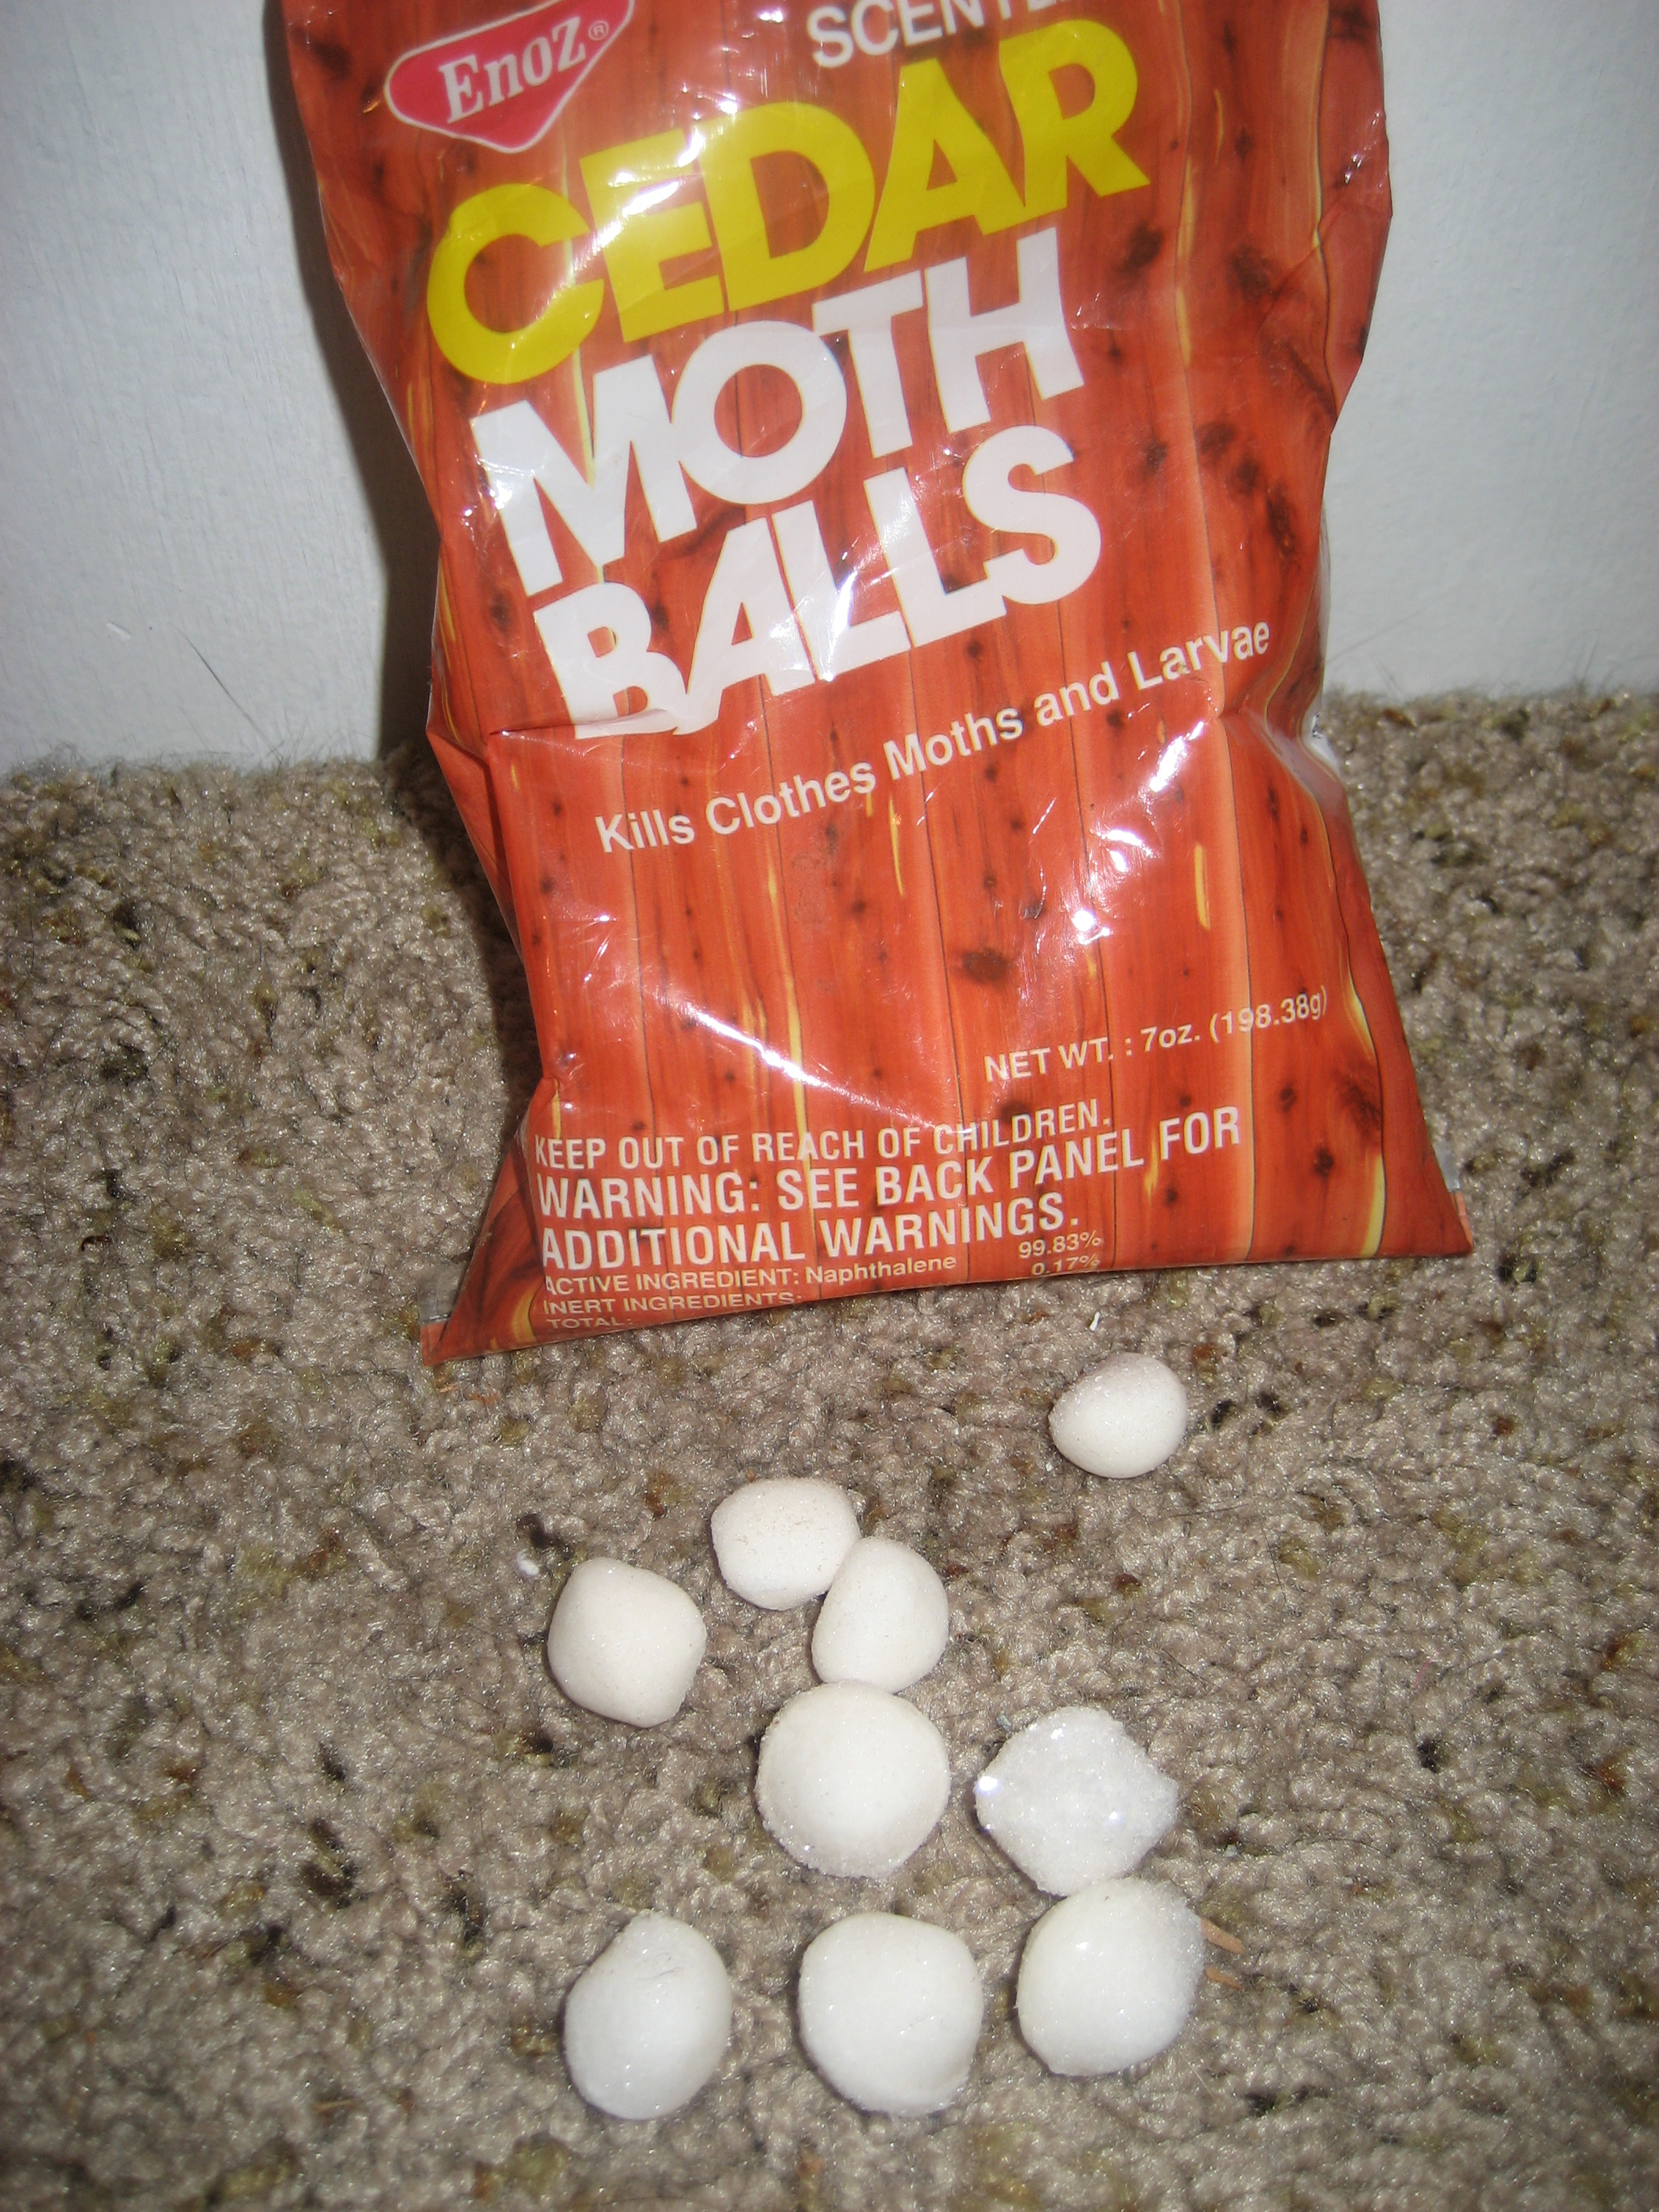 The Dangers of Mothballs: Do You Have Naphthalene or